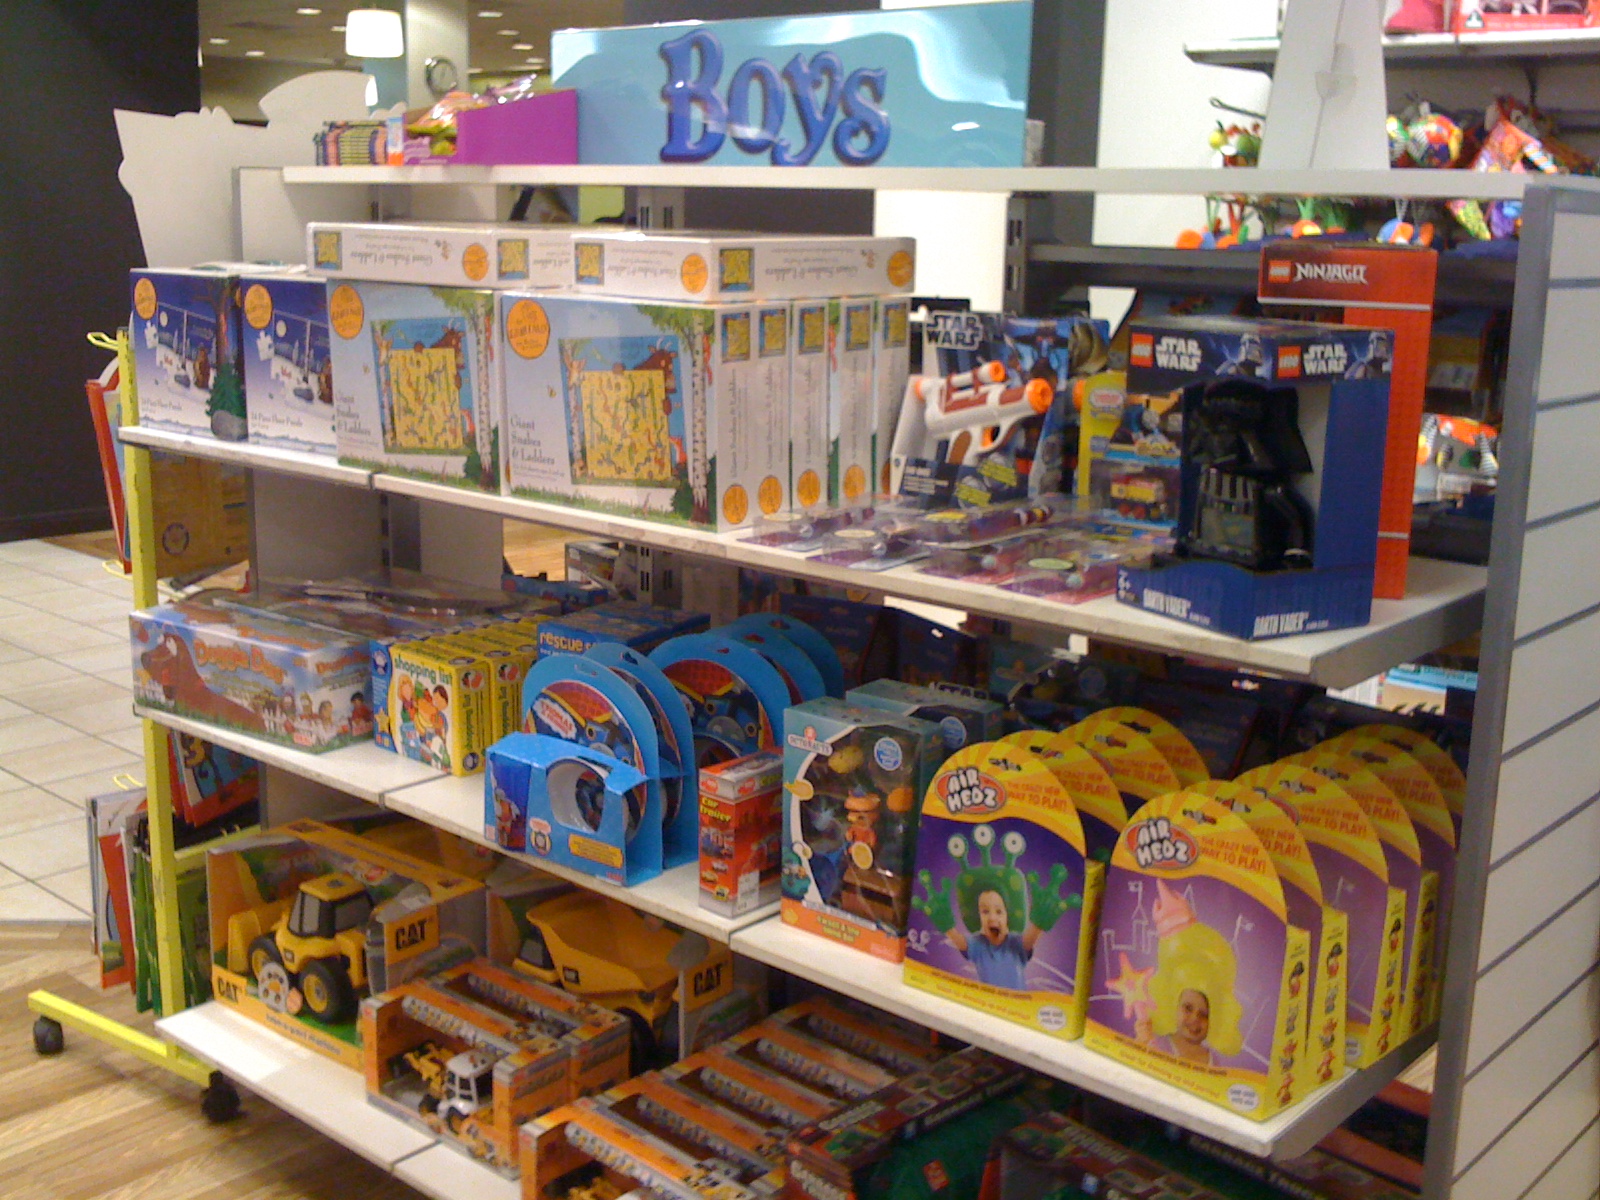 Store shelves filled with primary colors and boys’ toys.^[[Image](https://www.flickr.com/photos/janetmck/6826071252/in/photostream/) by [Janet McKnight](https://www.flickr.com/photos/janetmck/) is licensed under [CC BY 2.0](https://creativecommons.org/licenses/by/2.0/)]